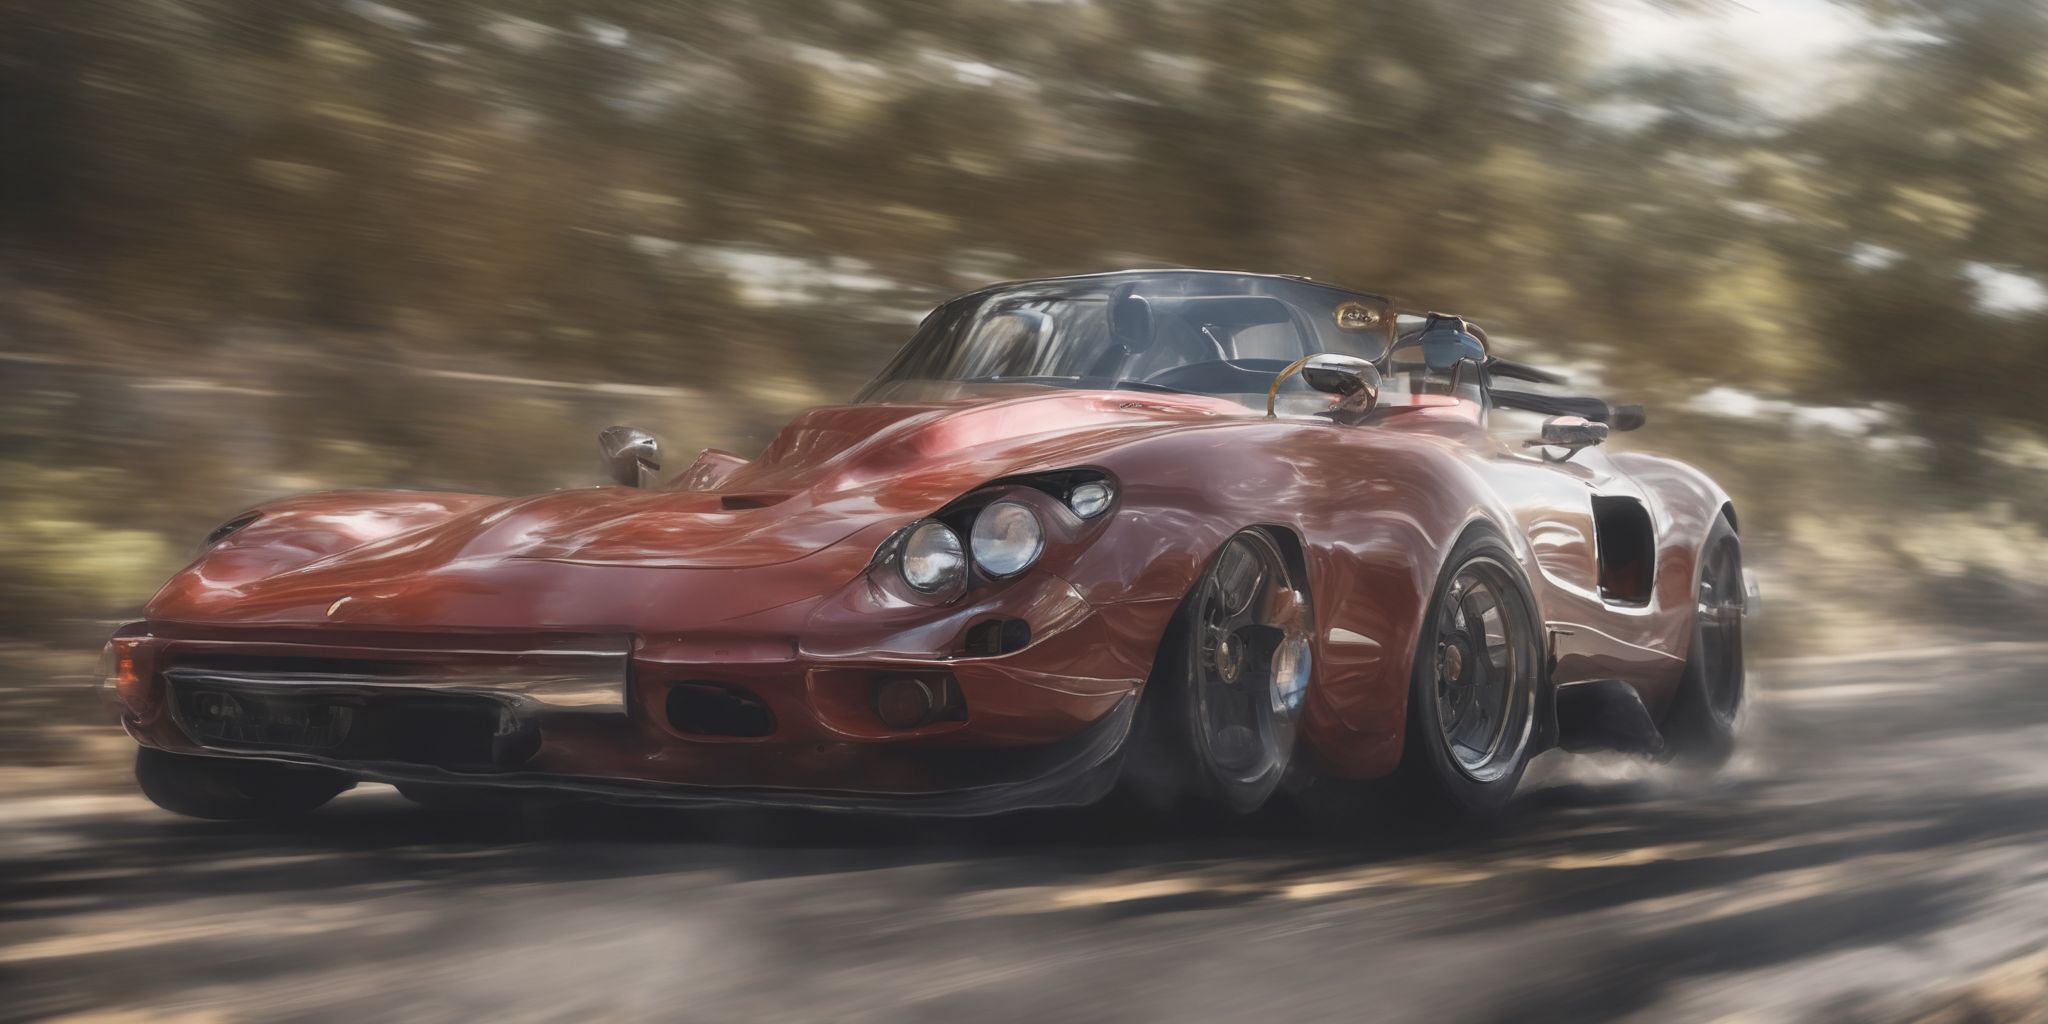 Speed  in realistic, photographic style